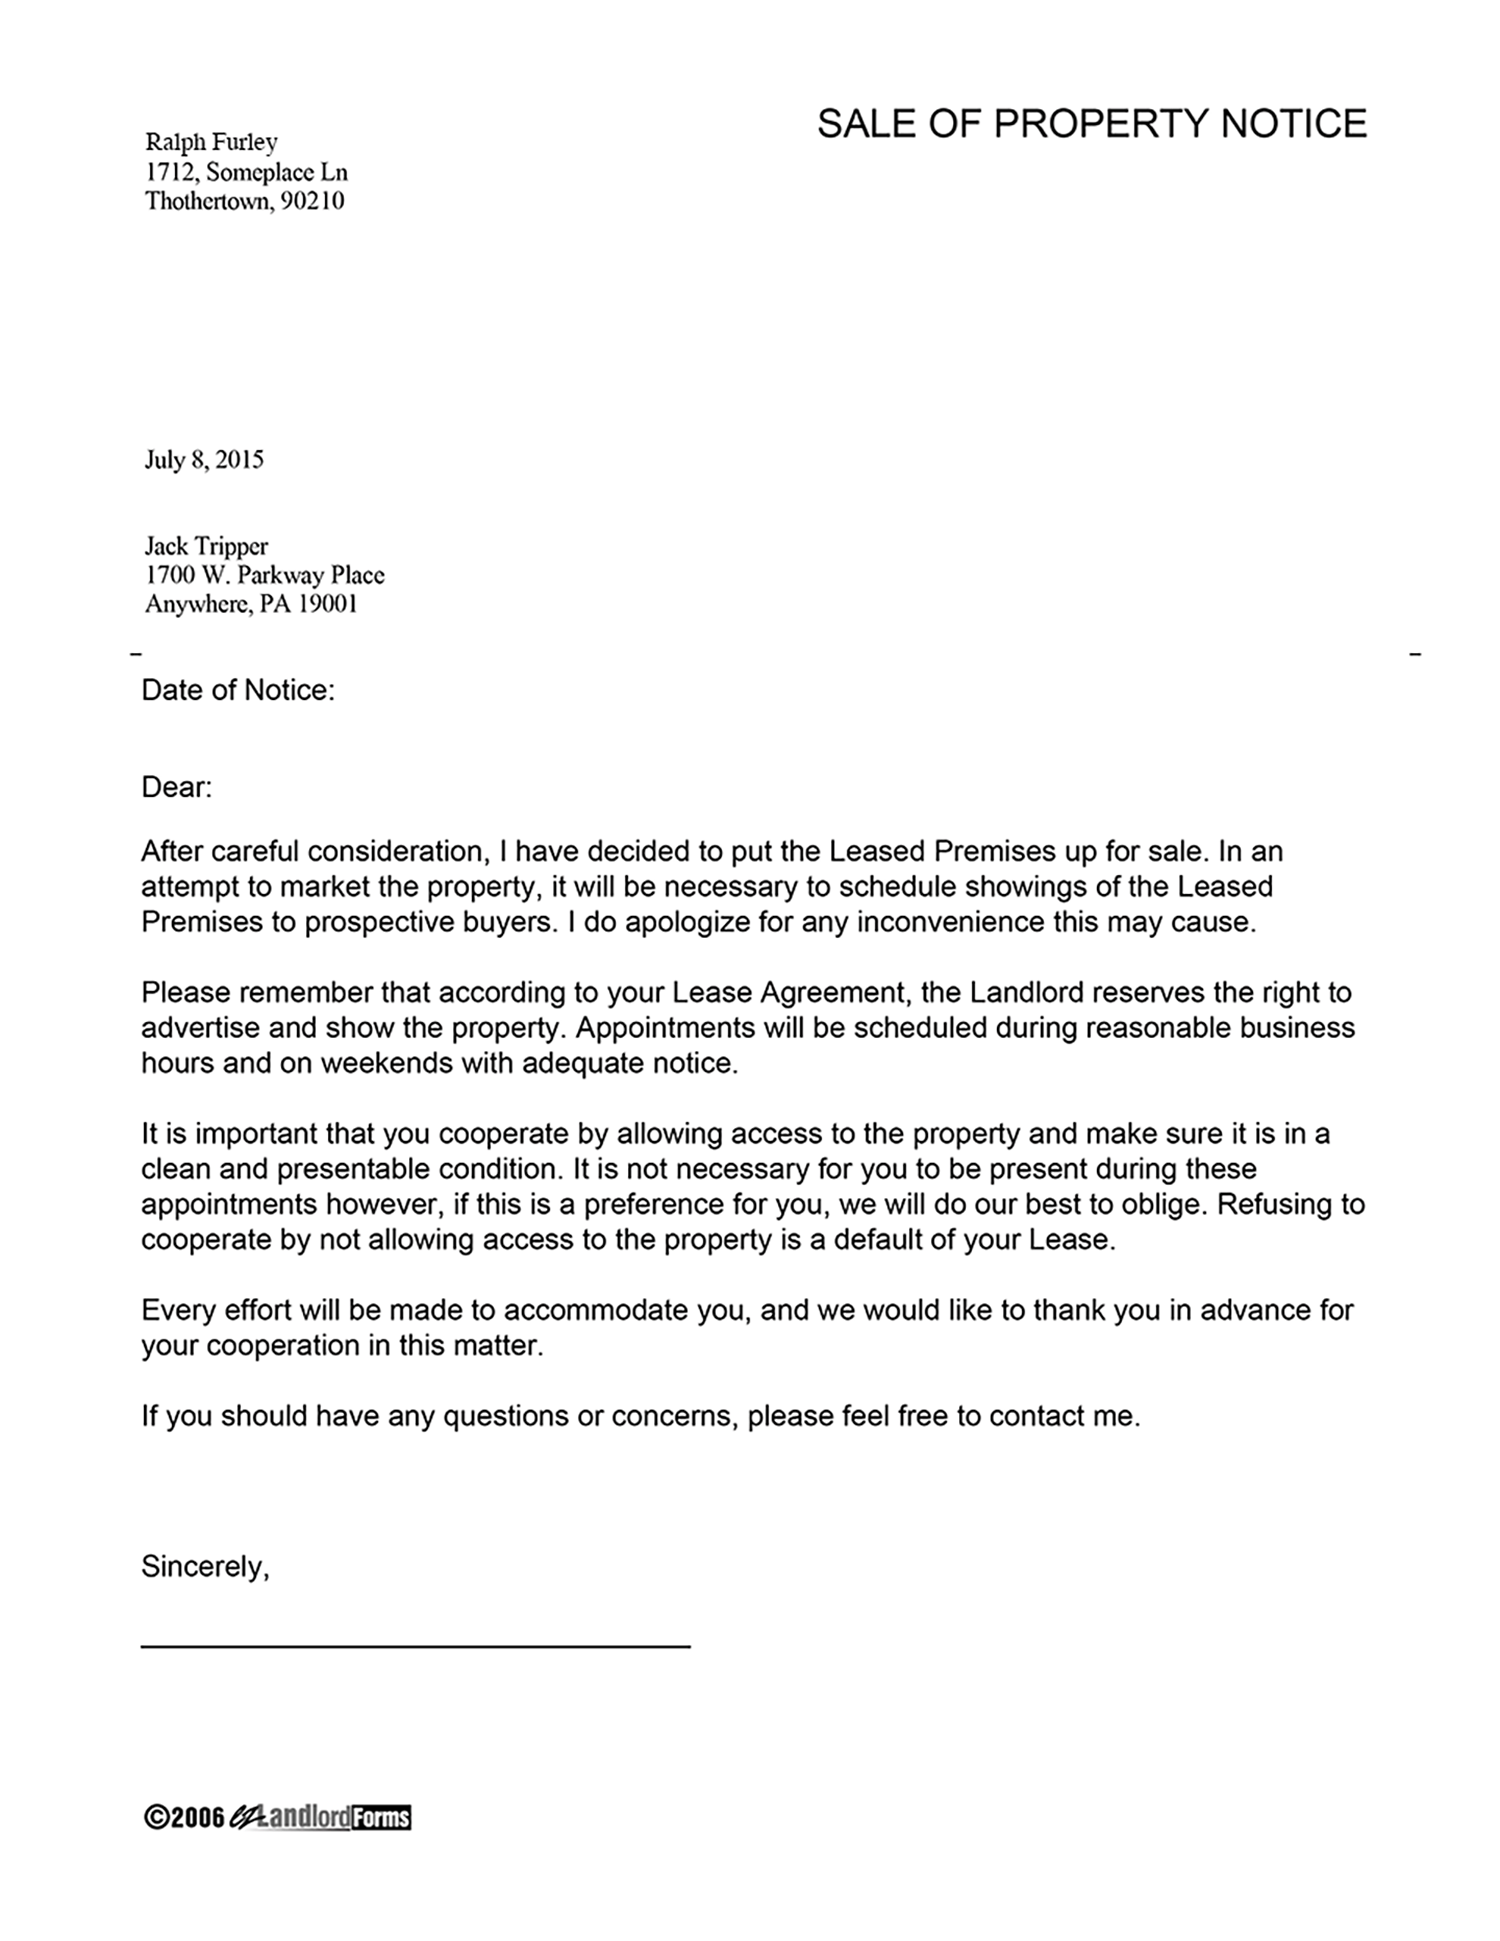 Letter To Tenant To Vacate Apartment from www.ezlandlordforms.com